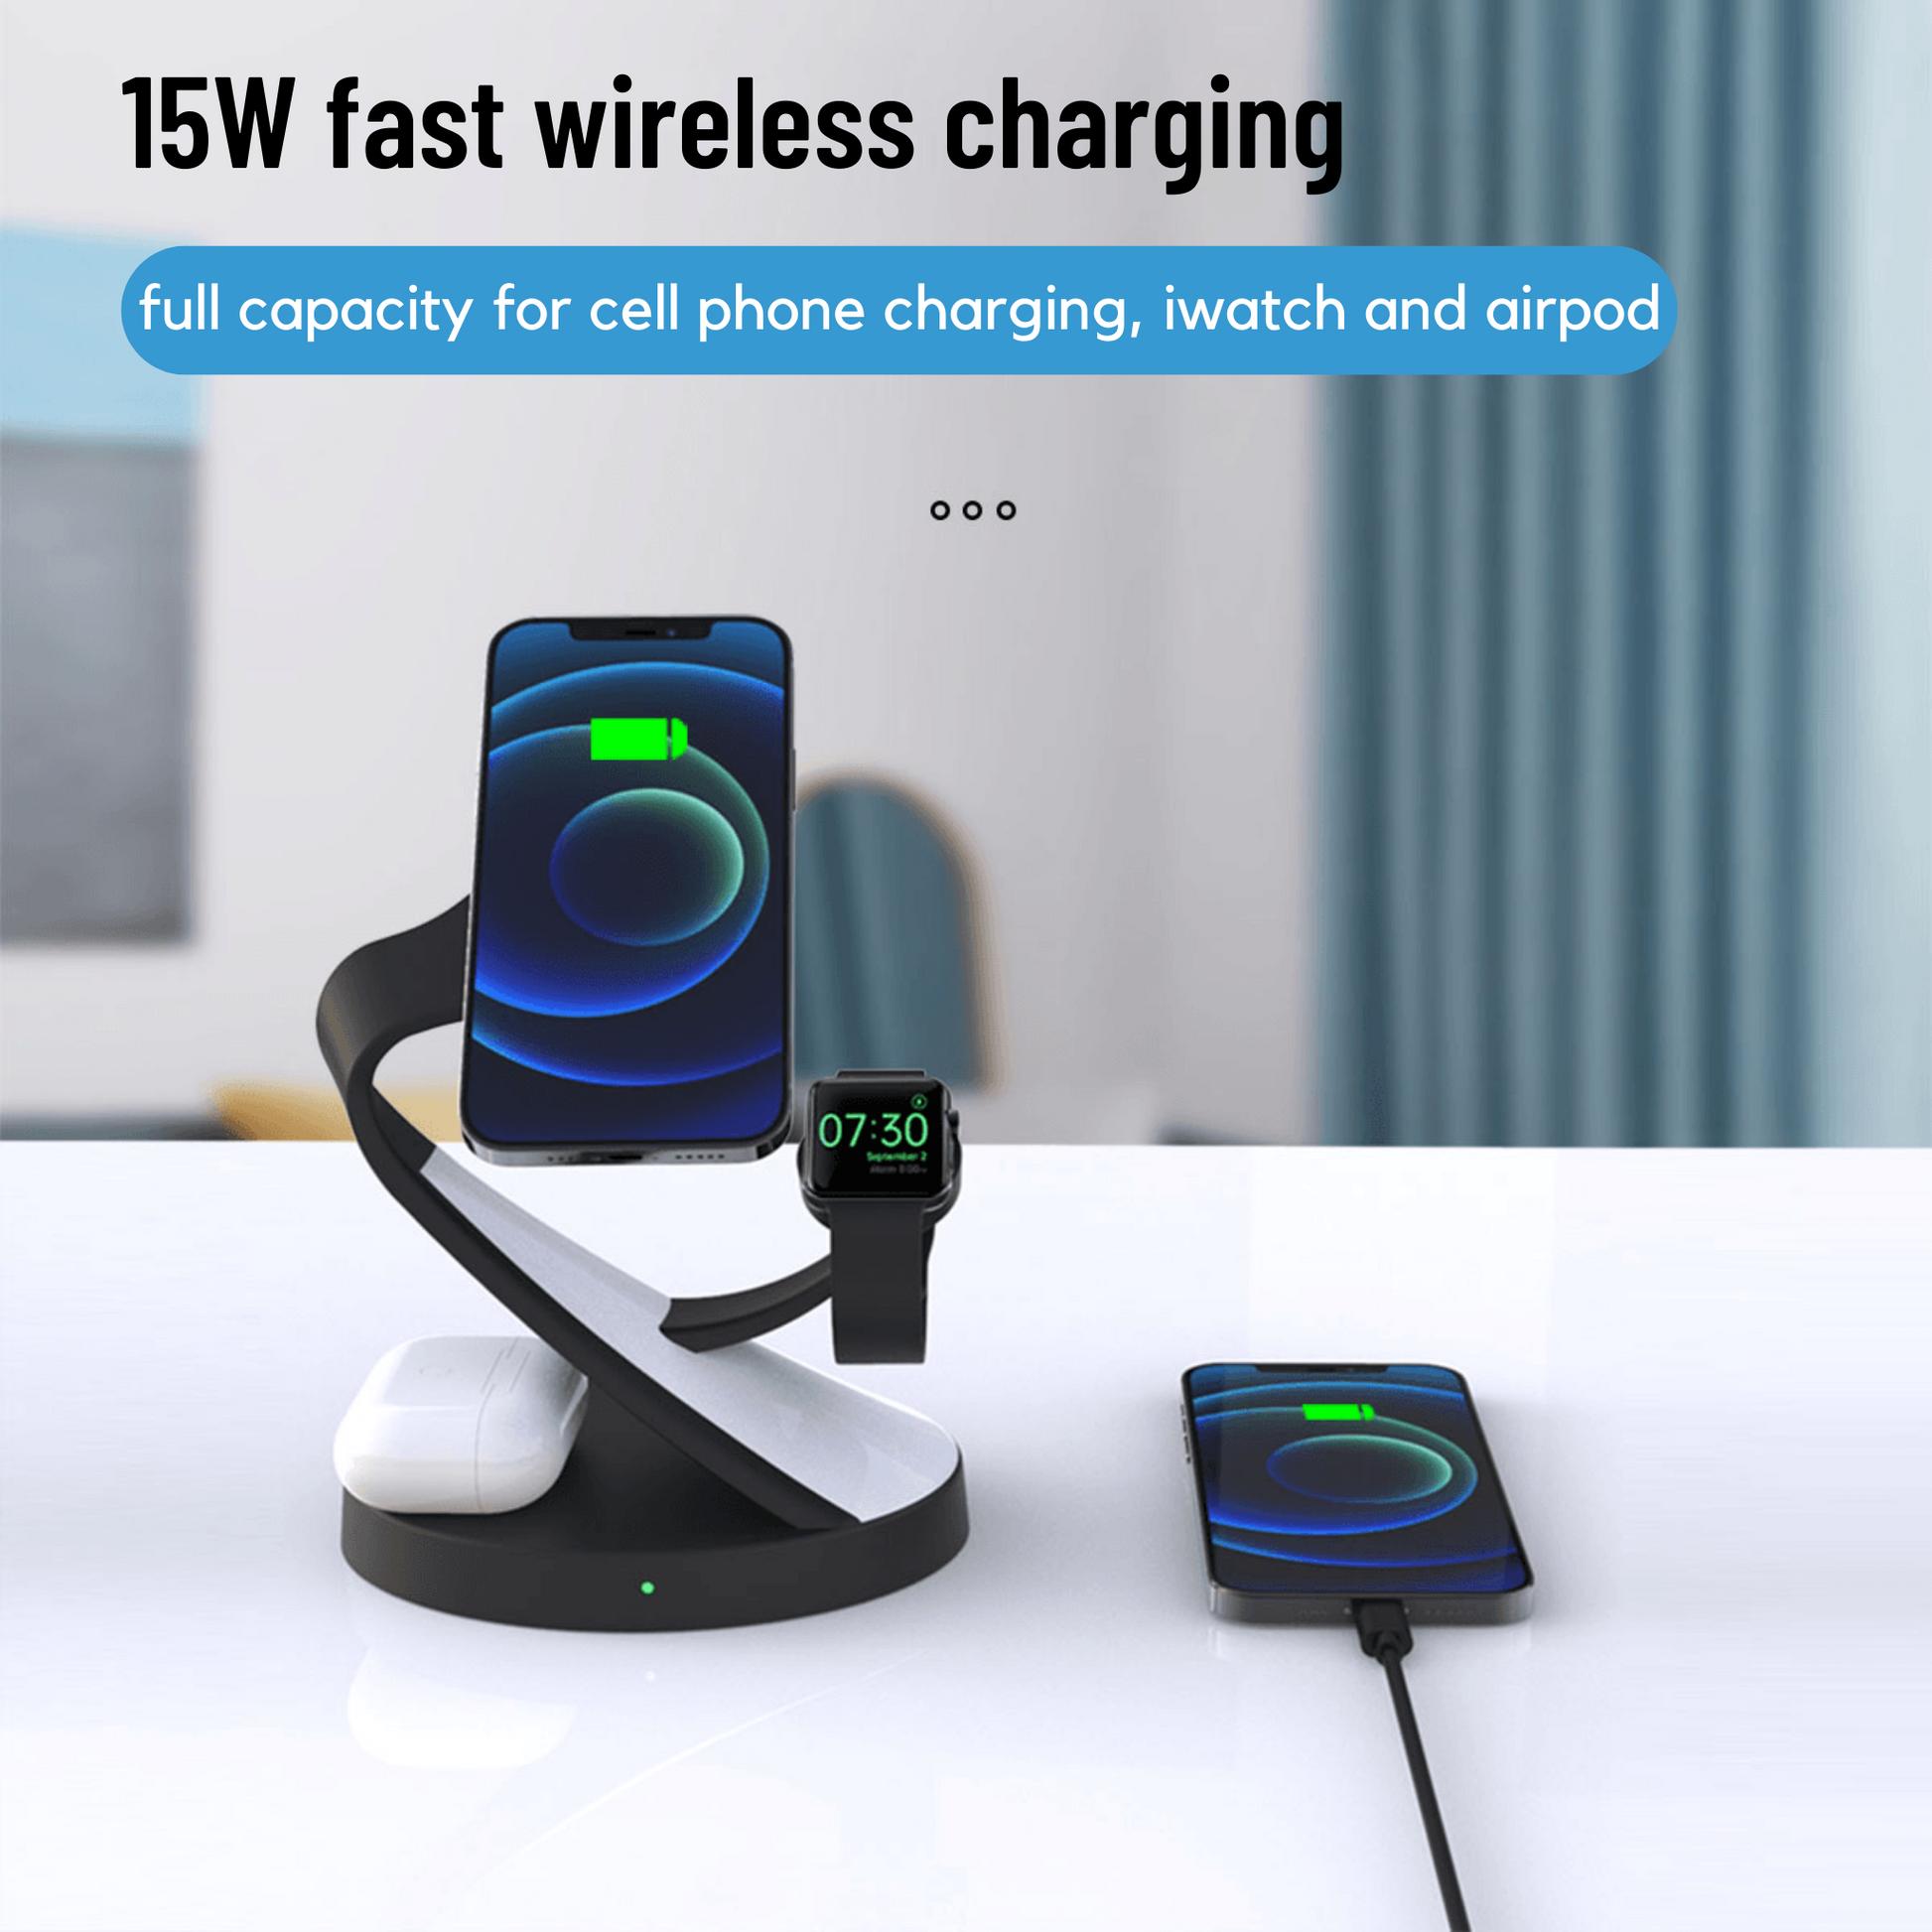 Crab One - 5 in 1 Wireless Charging Stand for Apple Devices